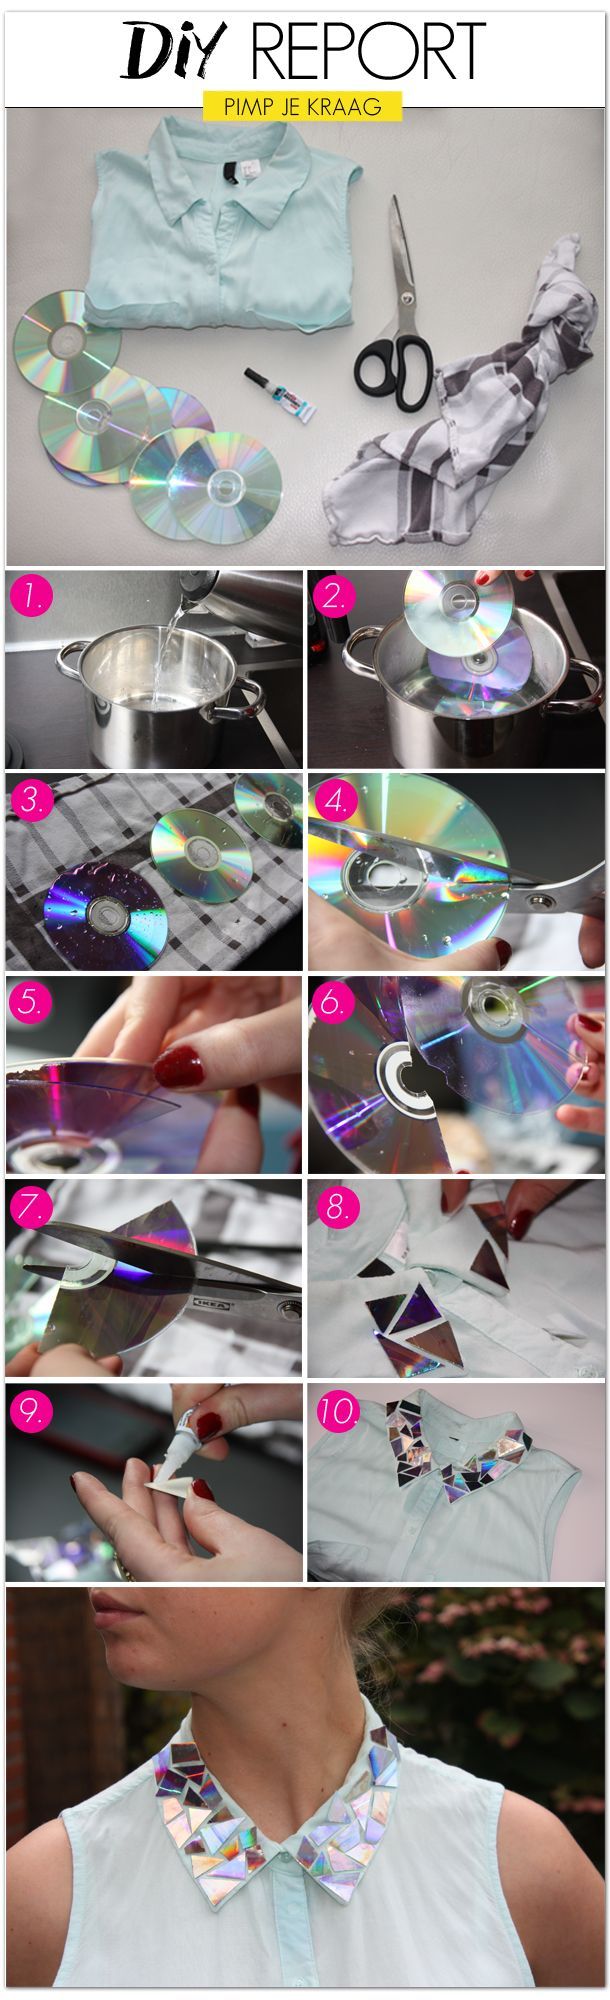 CD Collar CD is put in hot water for 5 minutes to separate it into layers, then